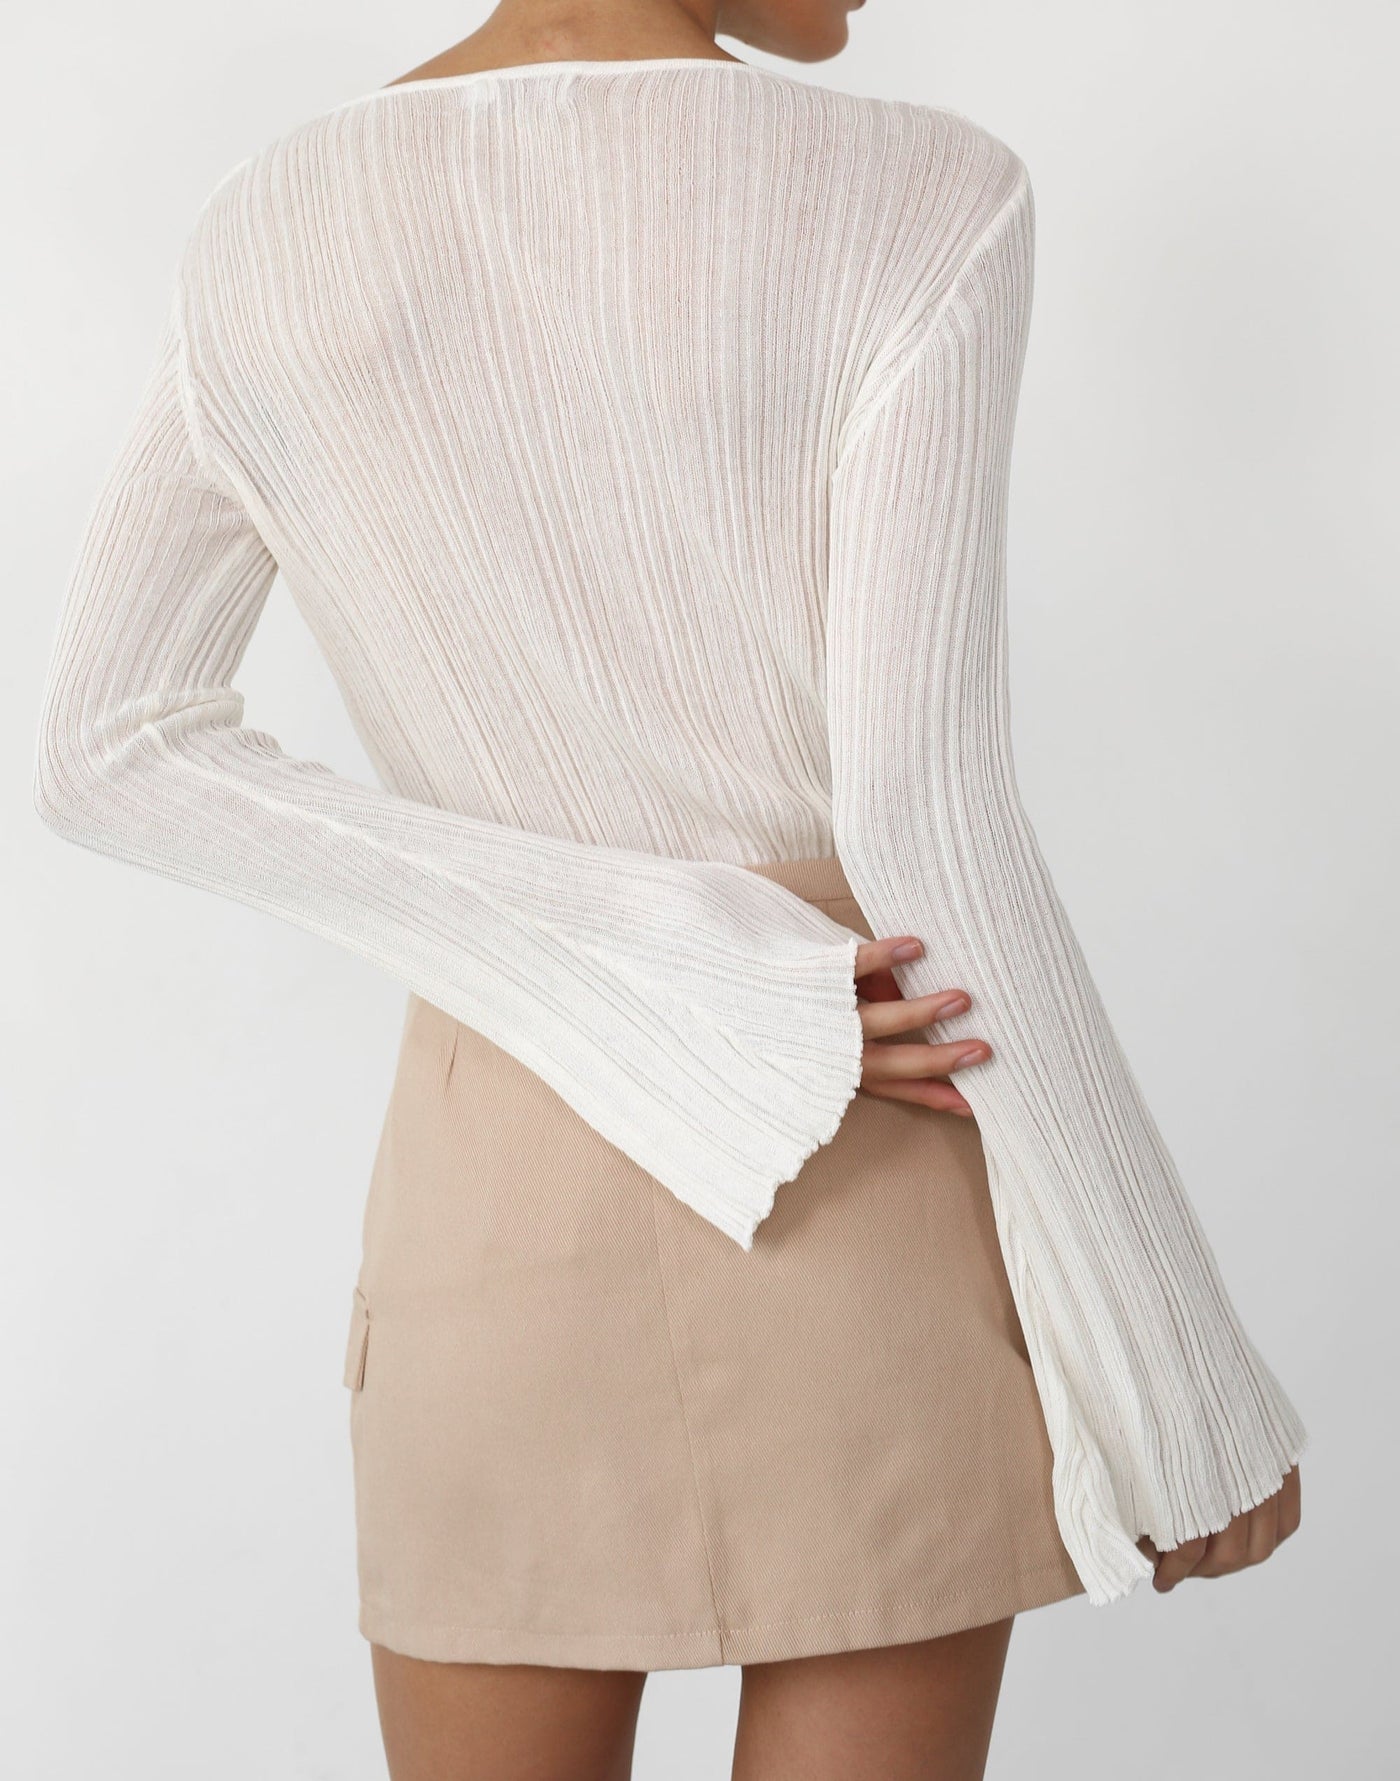 Corinna Long Sleeve Top (White) - Slightly Sheer Flared Sleeve Top - Women's Top - Charcoal Clothing